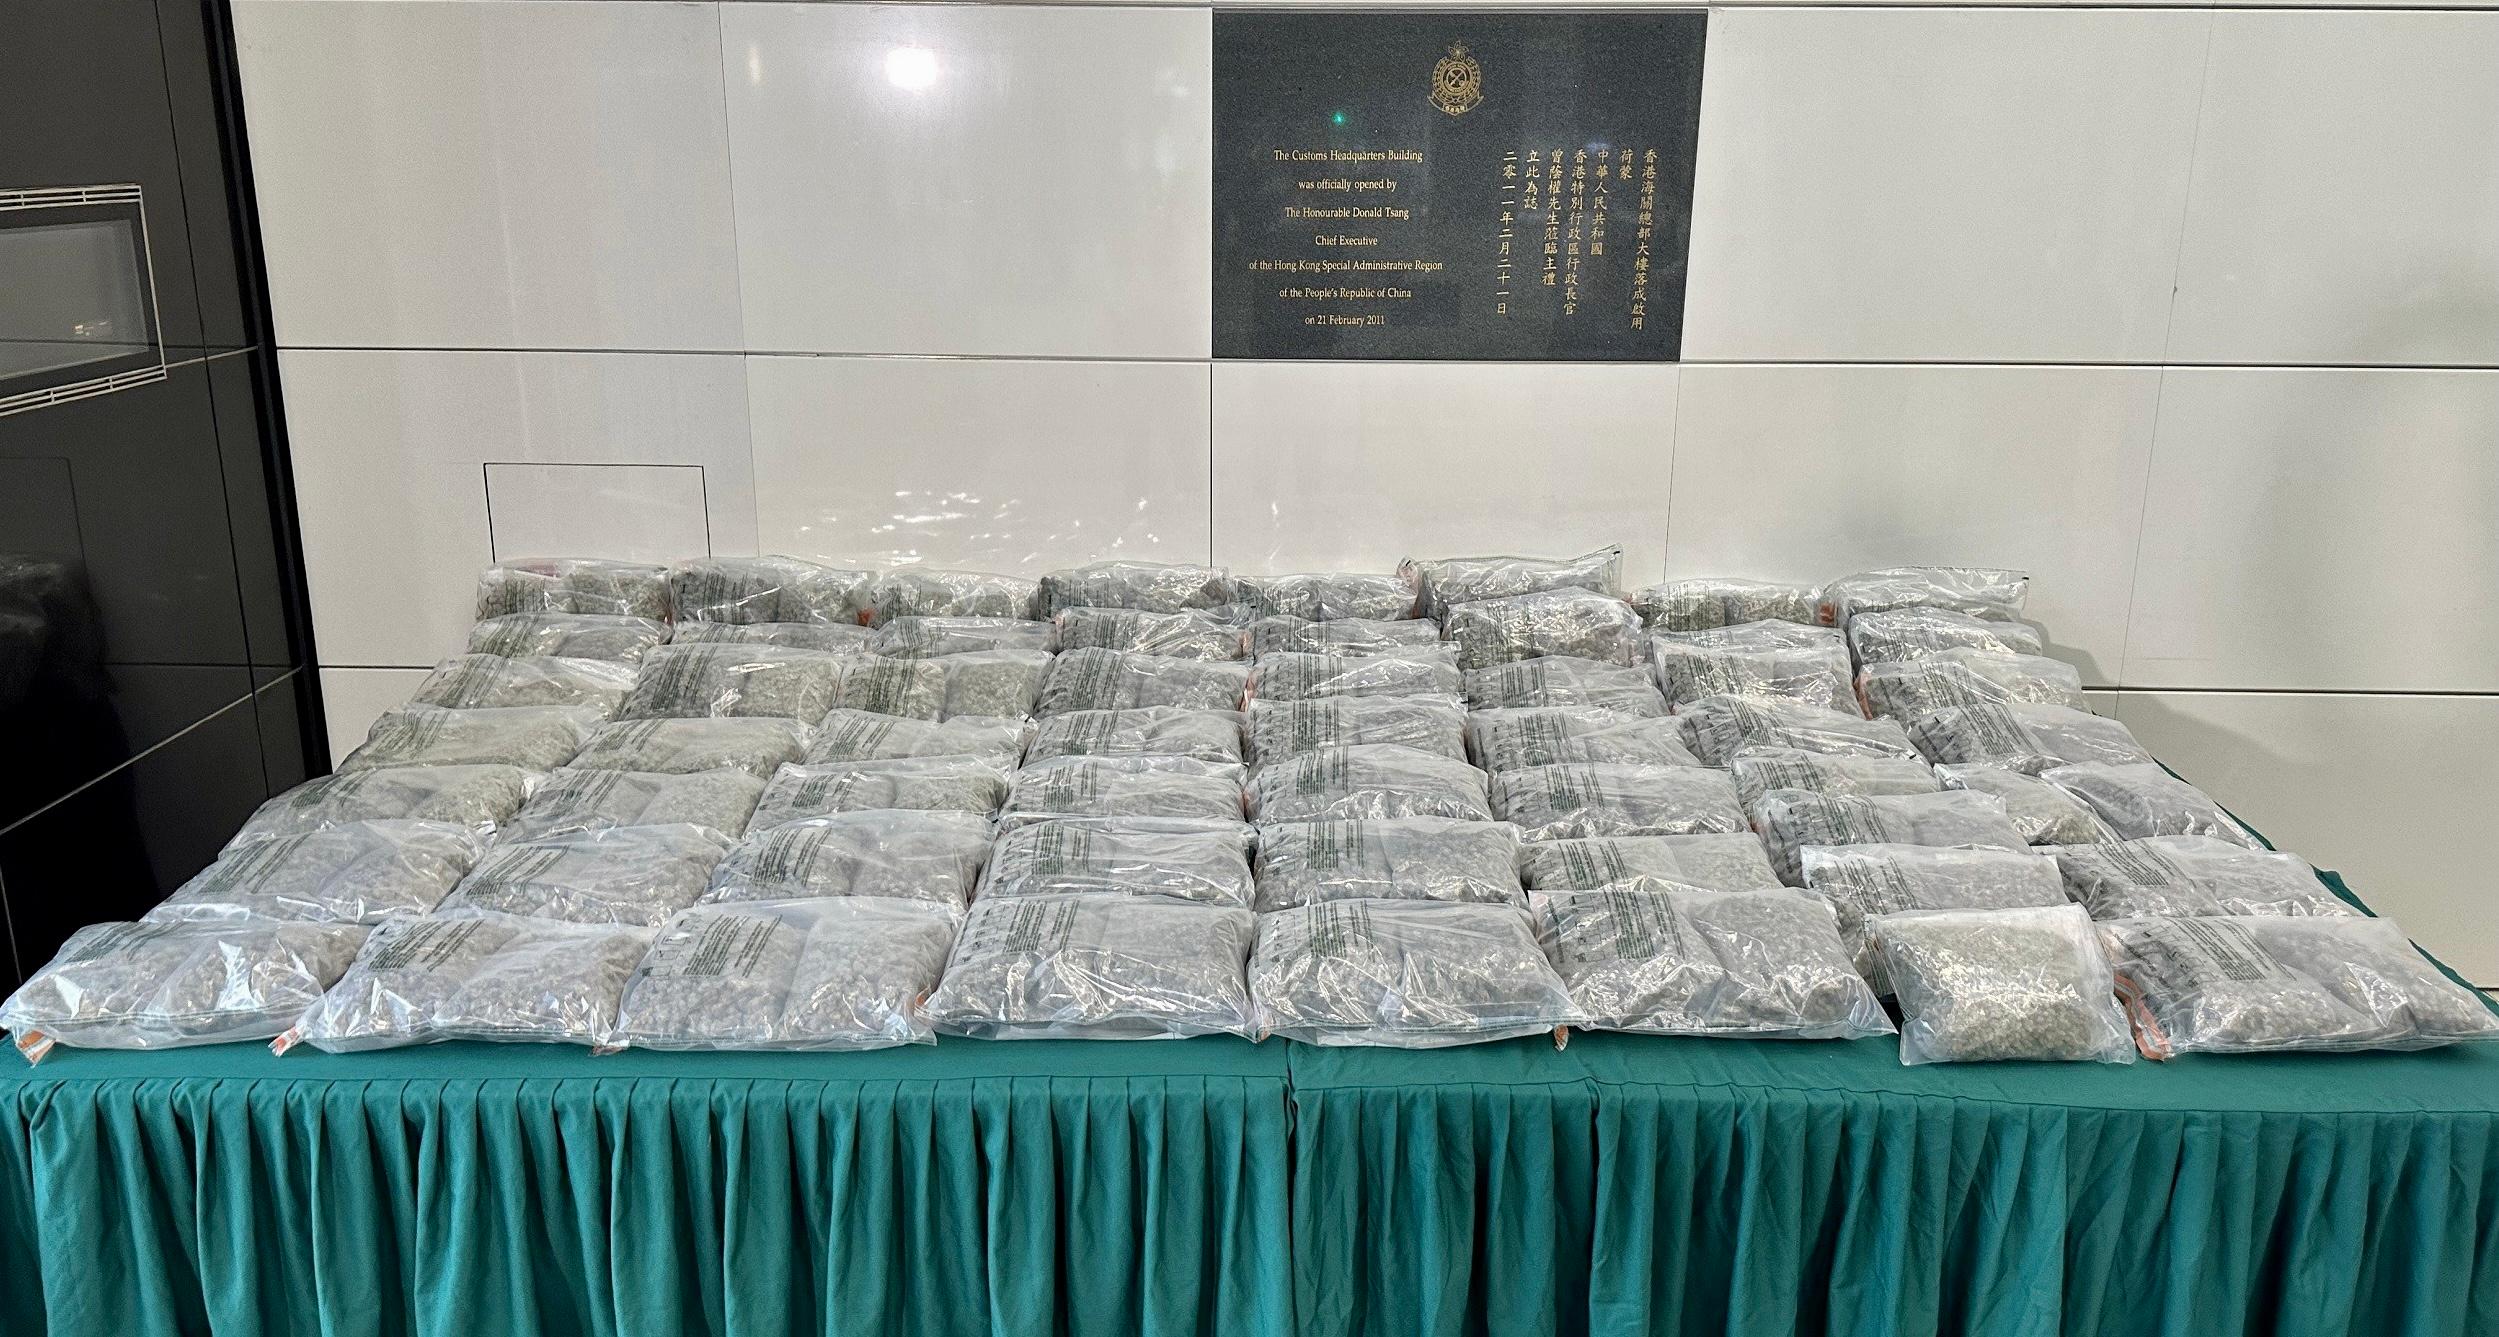 Hong Kong Customs on January 9 seized about 62 kilograms of suspected cannabis buds with an estimated market value of about $11 million at Hong Kong International Airport. Photo shows the suspected cannabis buds seized.